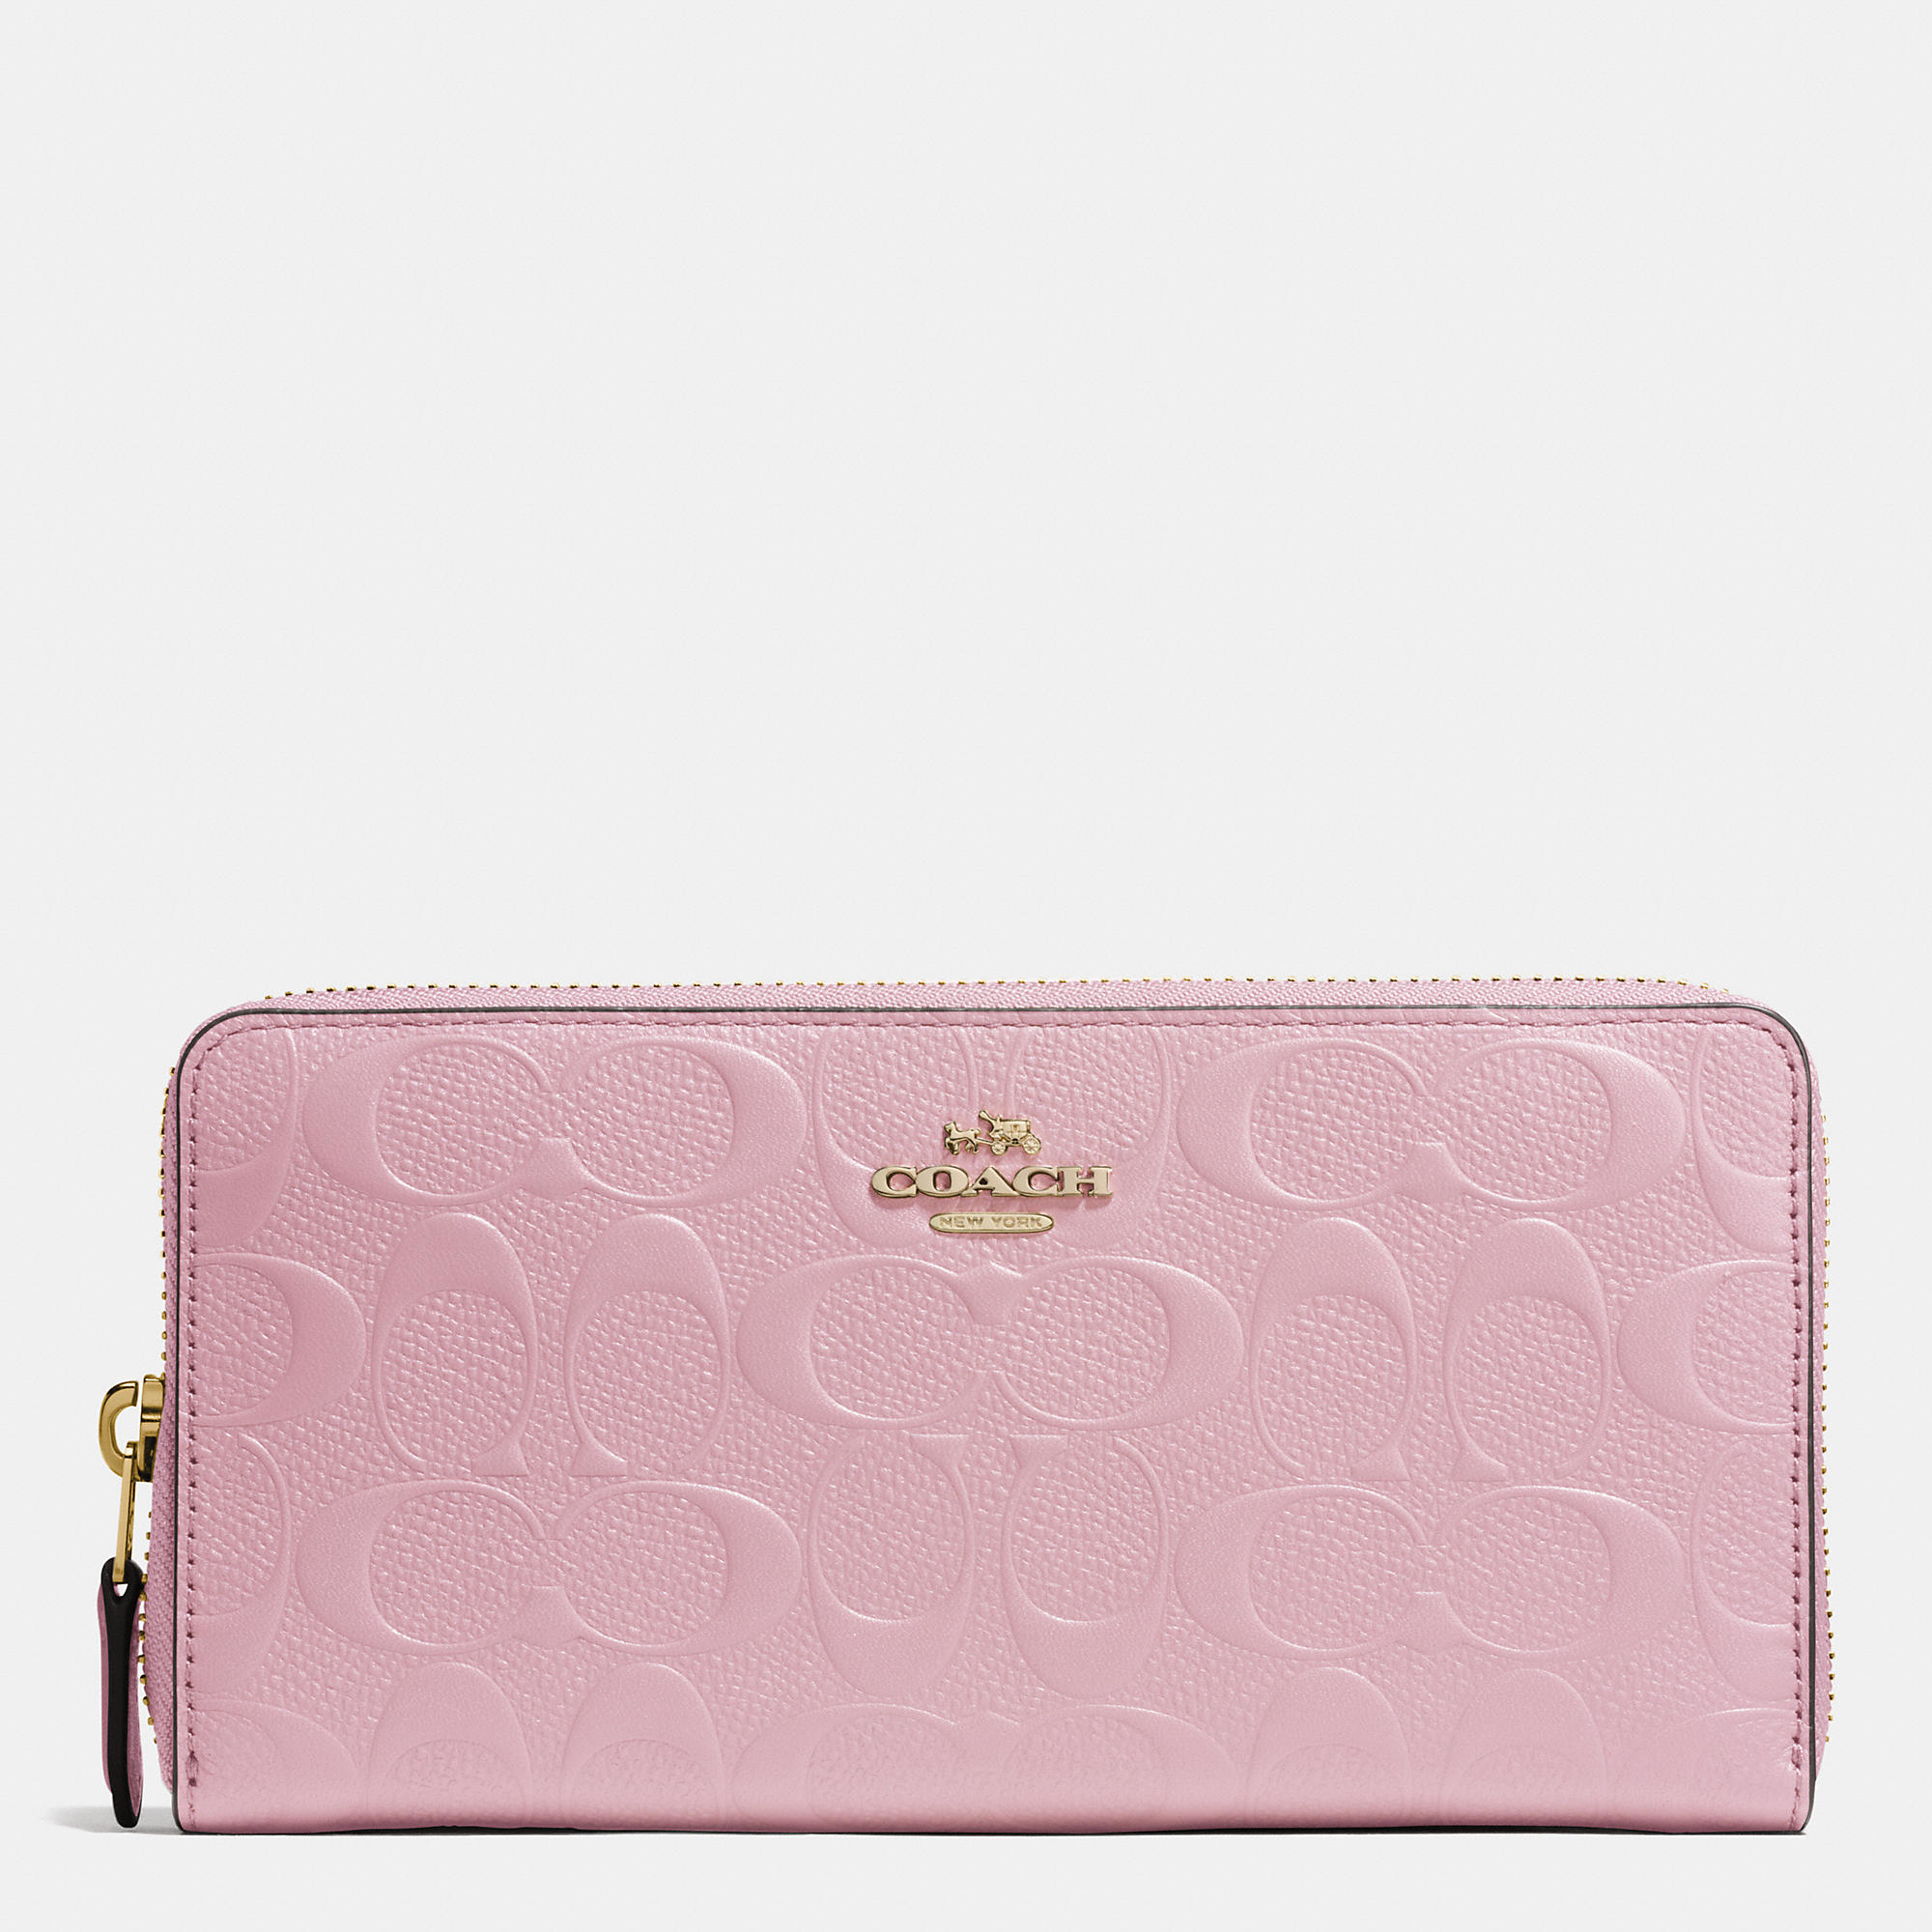 COACH Accordion Zip Wallet In Signature Embossed Leather in Pink